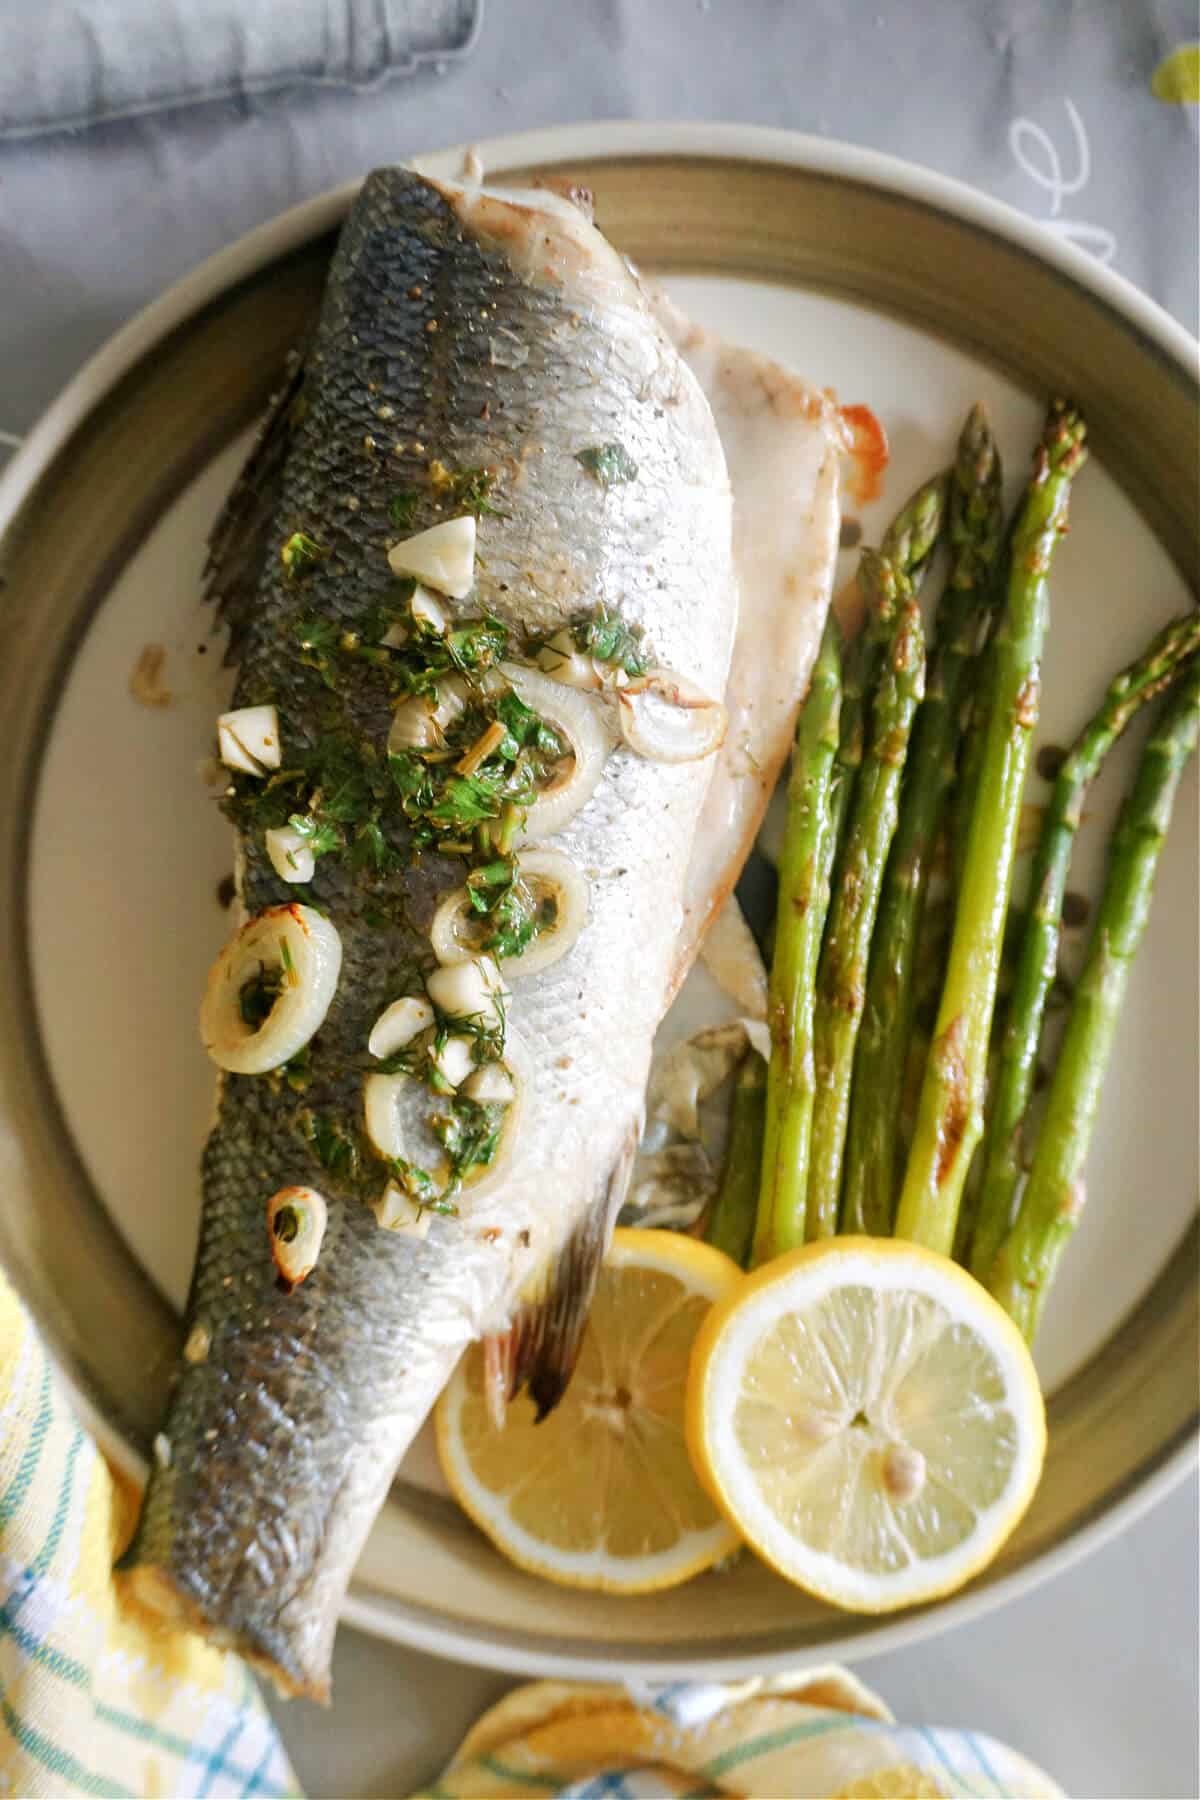 A plate with a baked sea bass topped with lemon butter sauce, asparagus on the side and 2 lemon slices.